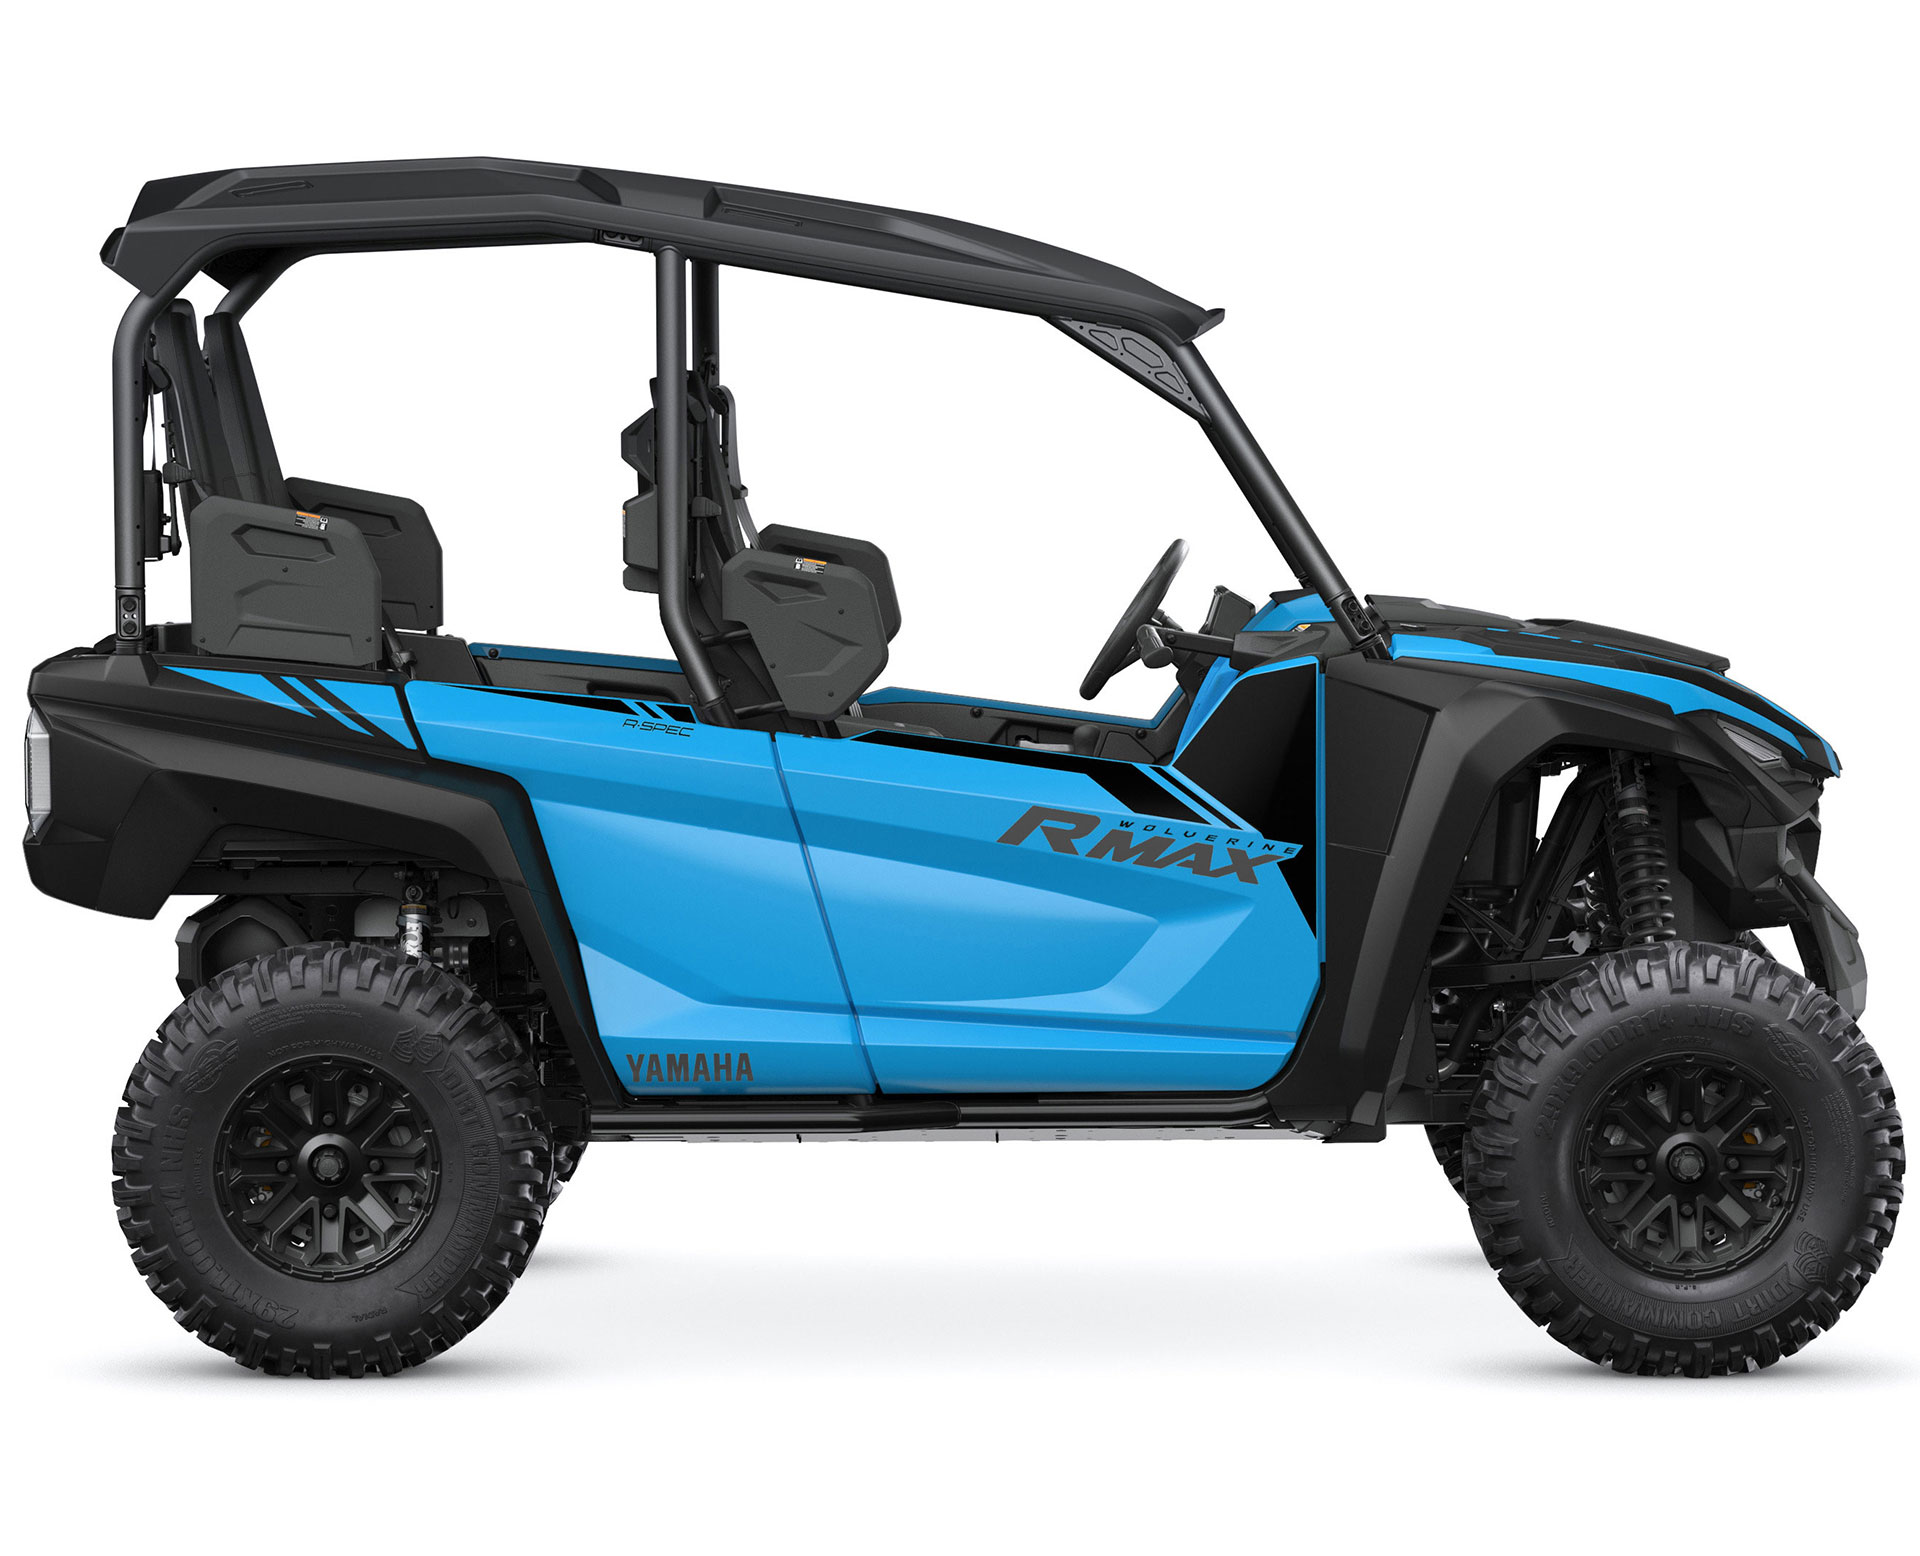 Thumbnail of your customized 2023 WOLVERINE® RMAX4™ 1000 R-SPEC